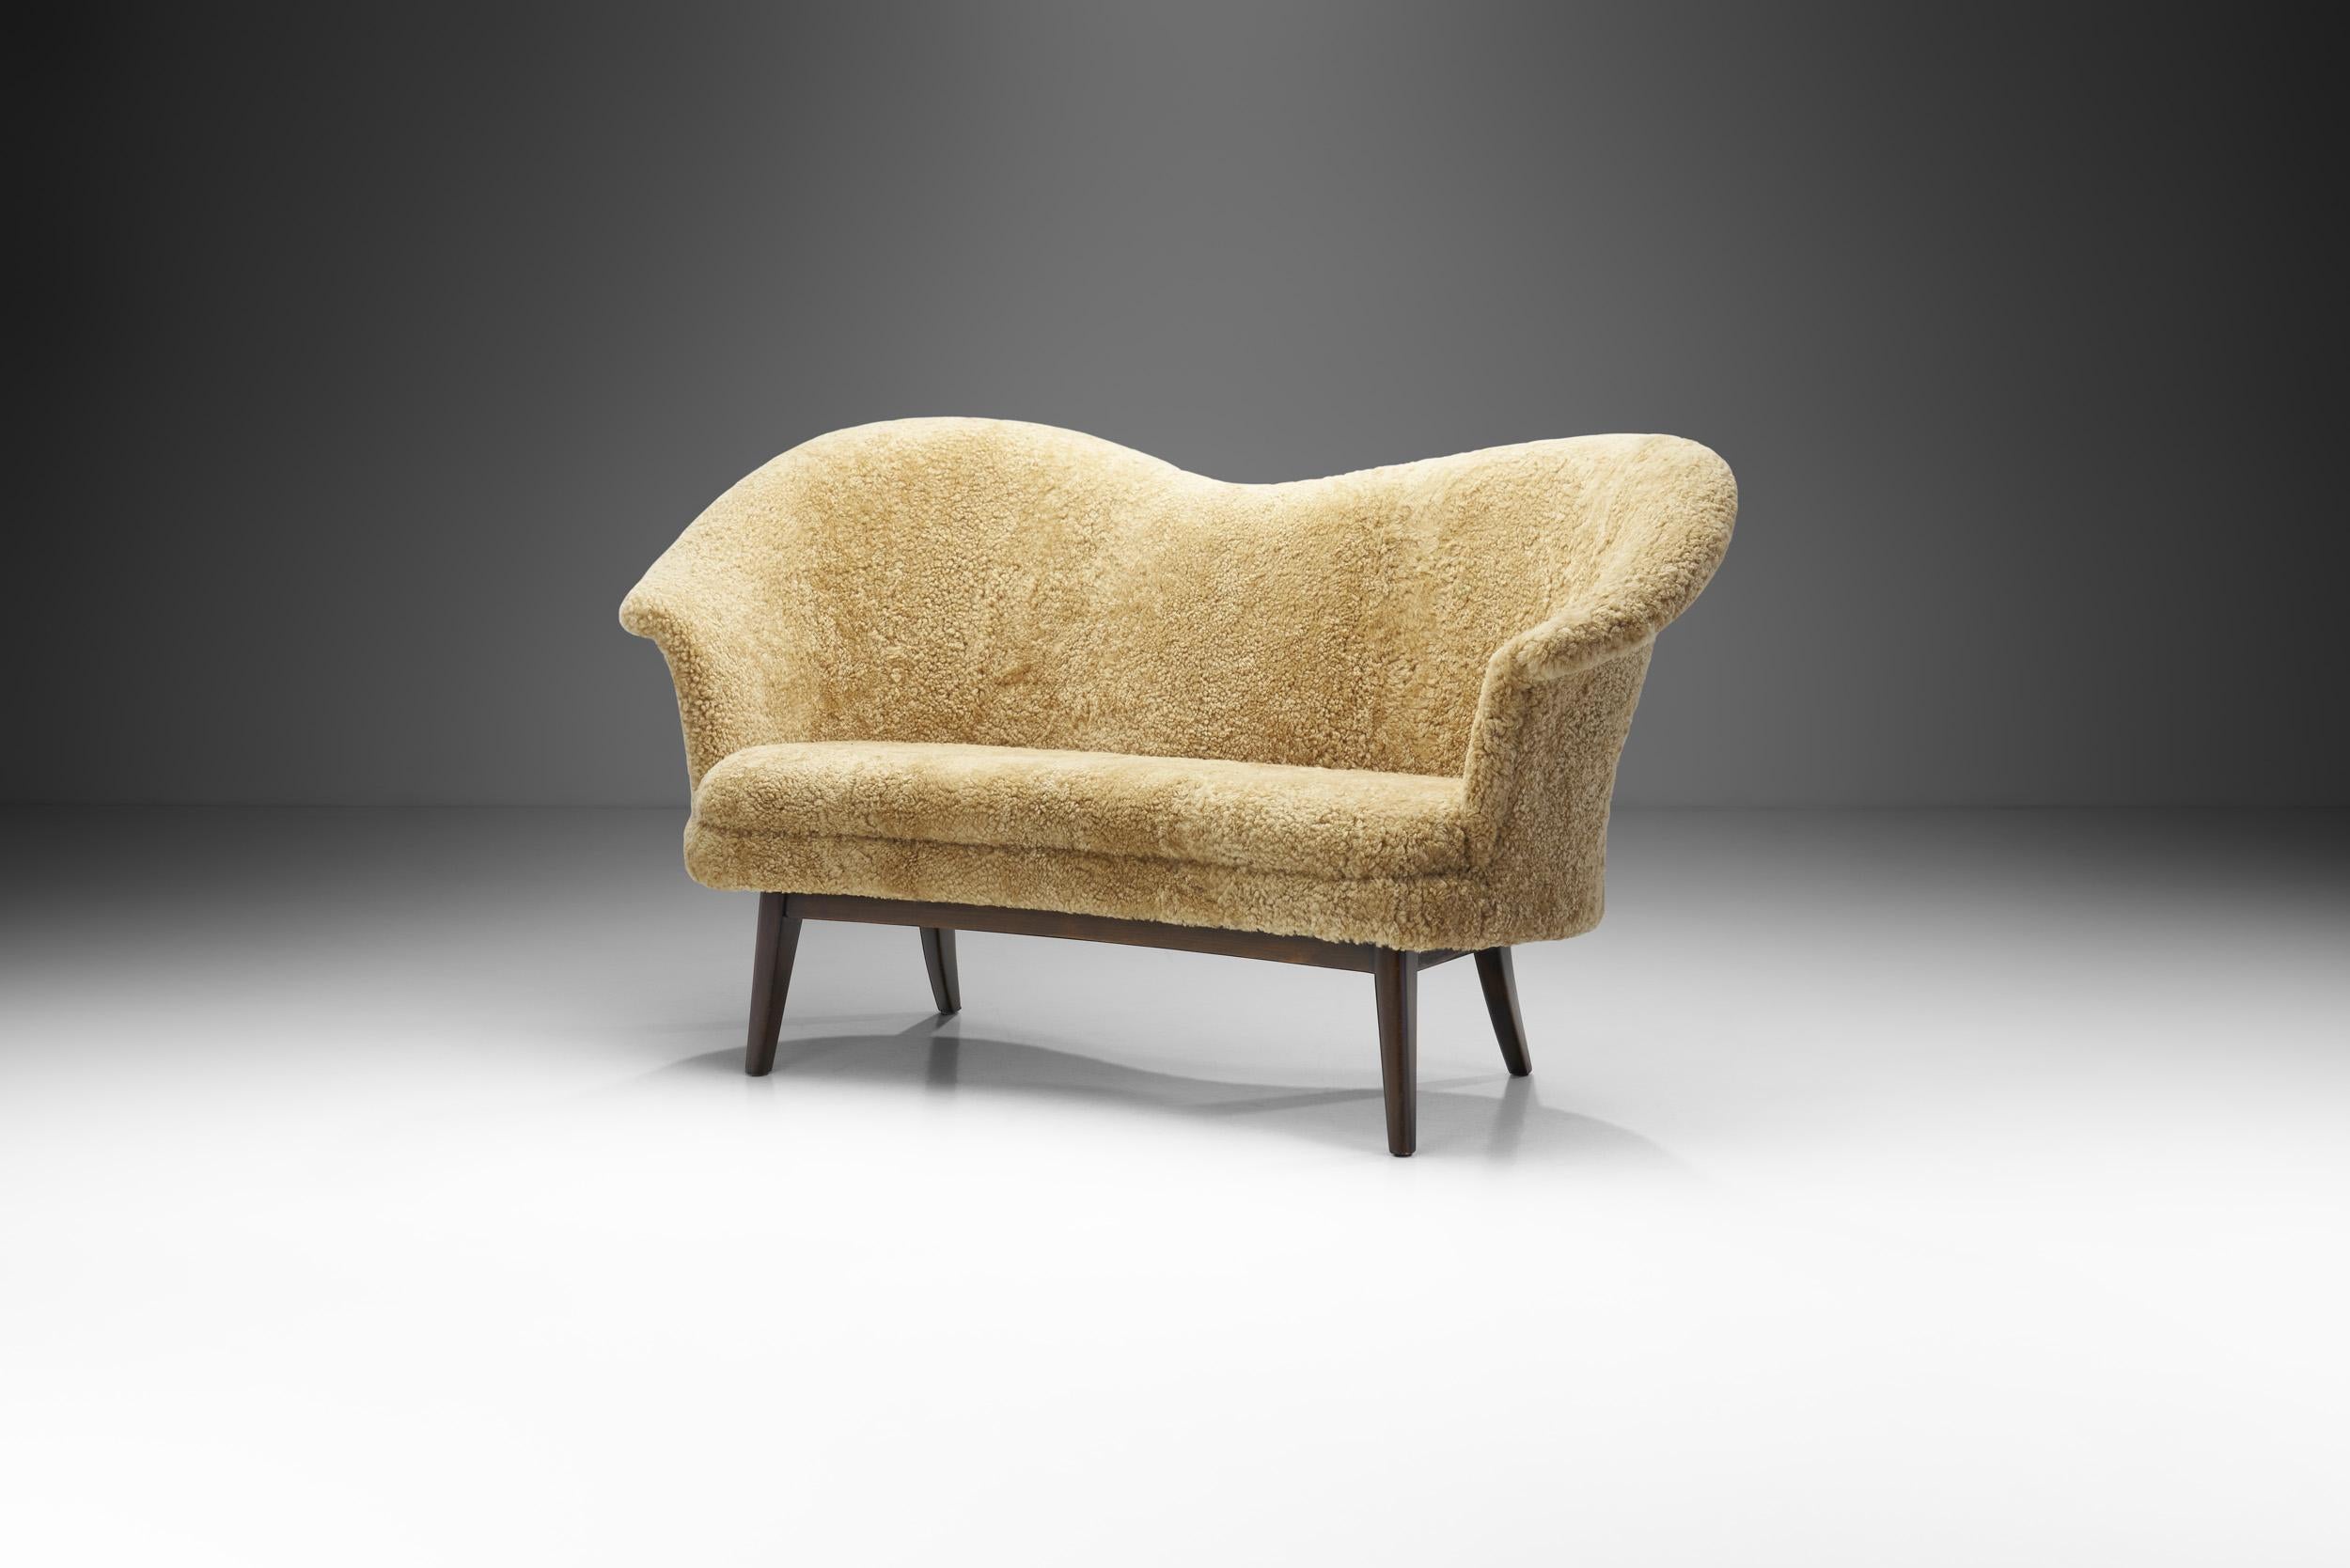 This lovely “Duetto” loveseat was designed back in the 1950s to bring the sitters closer together. This intention is clearly traceable in Ottelin’s drawings, where the back was drawn as hands embracing the users.

A loveseat derives its name from